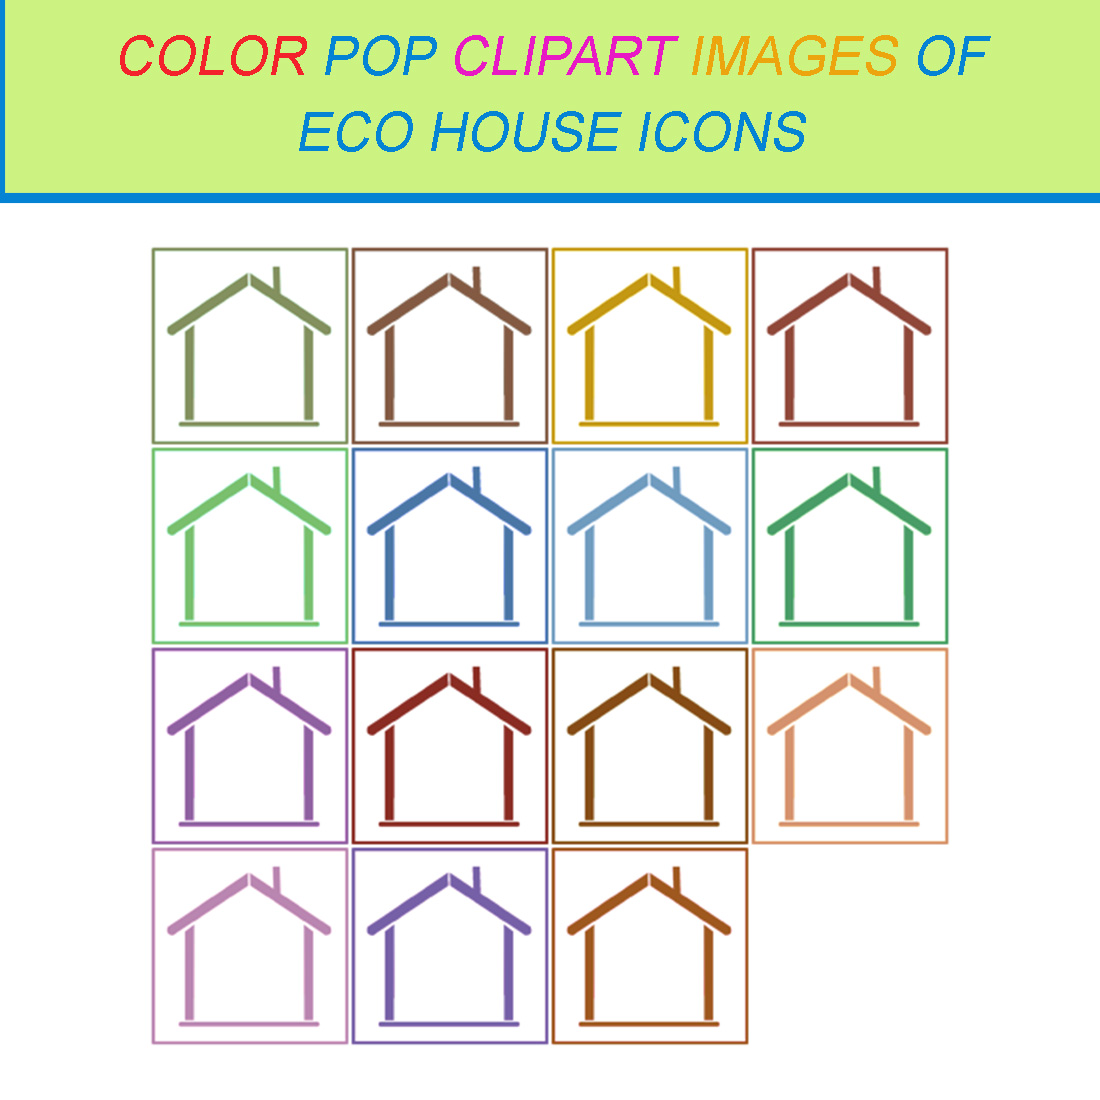 15 COLOR POP CLIPART IMAGES OF ECO HOUSE ICONS cover image.